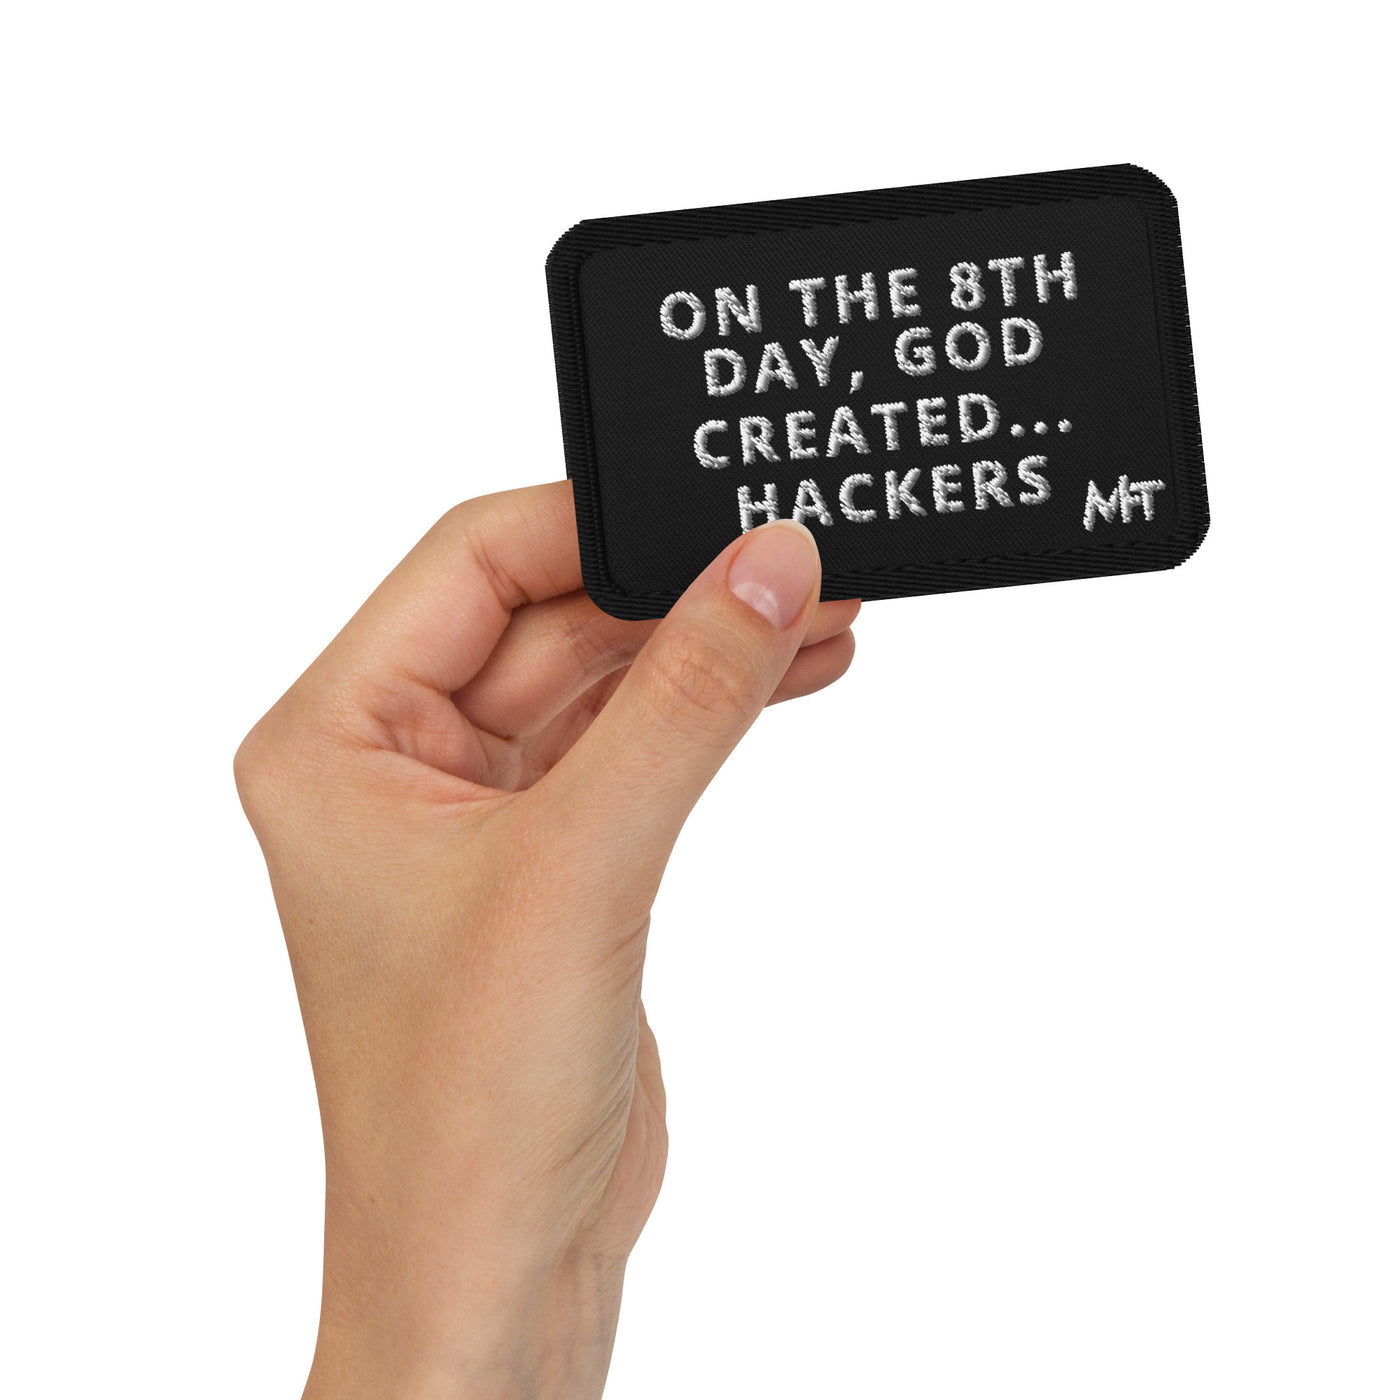 On the 8th day God created hackers - Embroidered patches